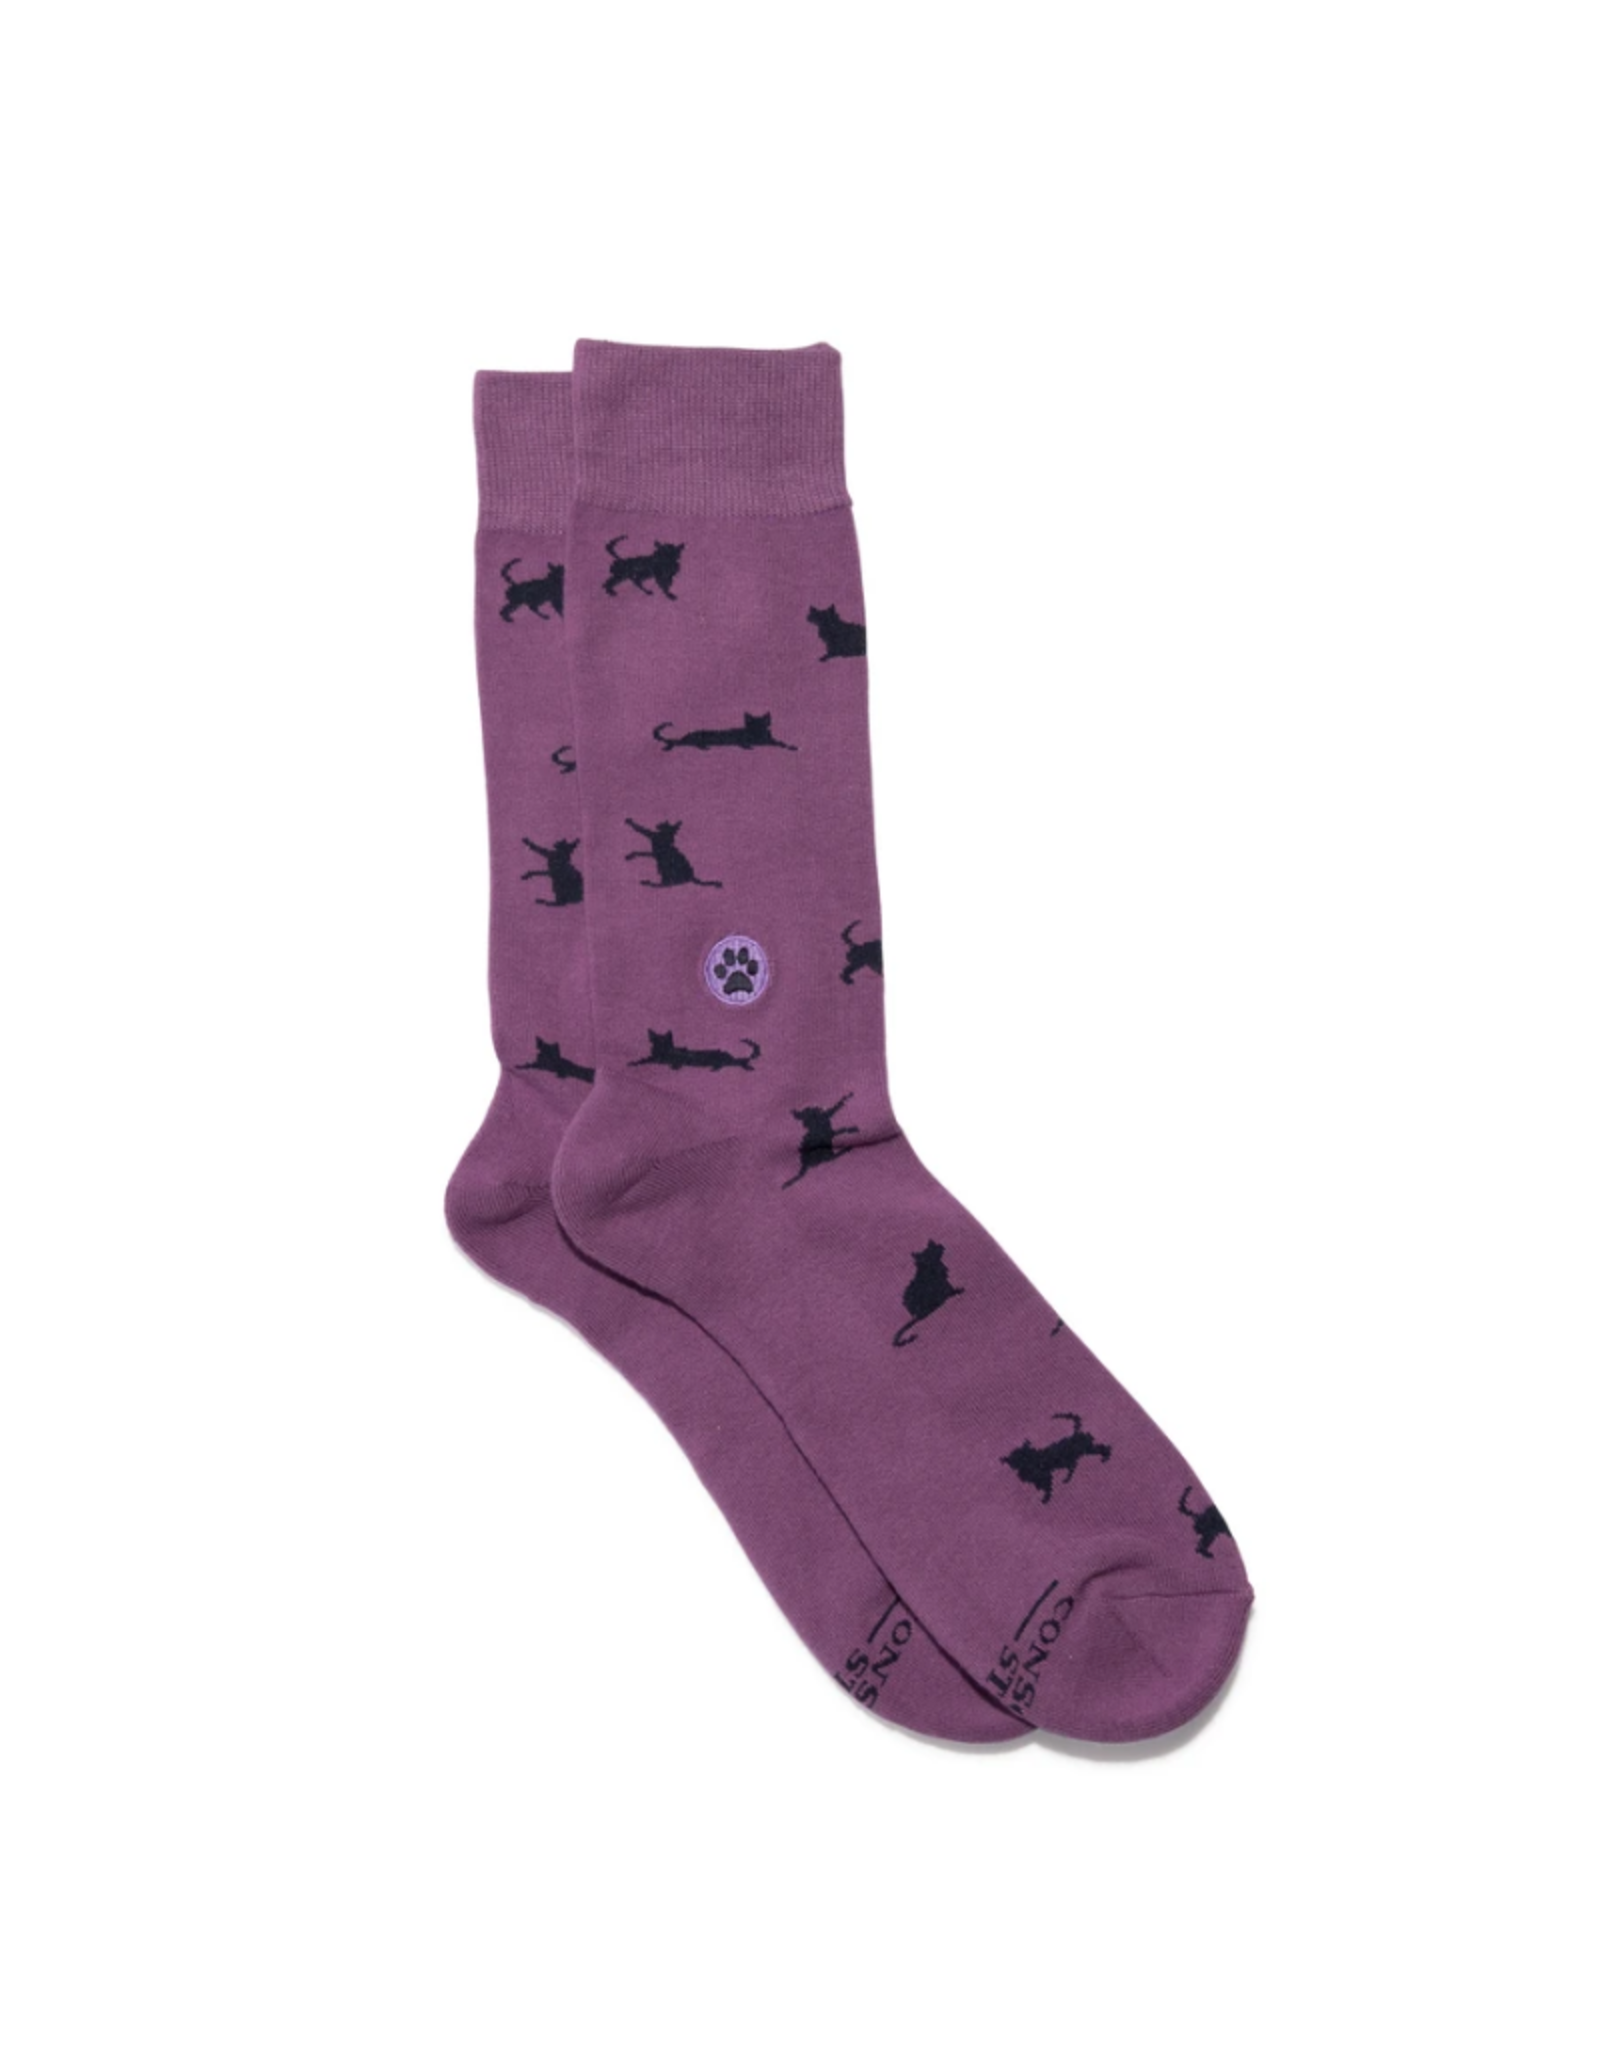 India Socks that Save Cats (Small) Purple - India